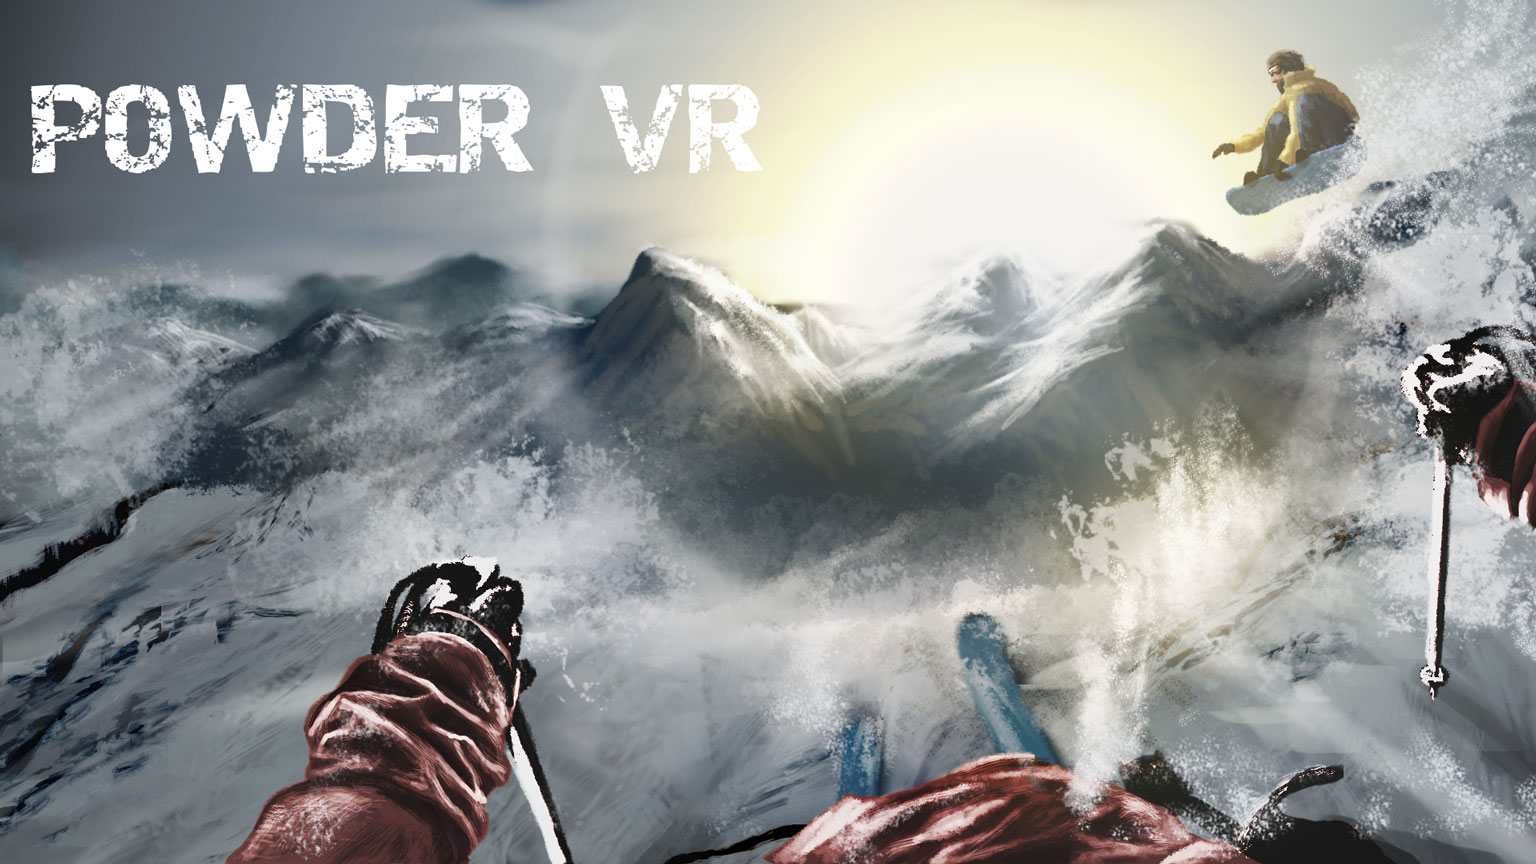 Get ready to do some crazy winter stunts with Powder VR